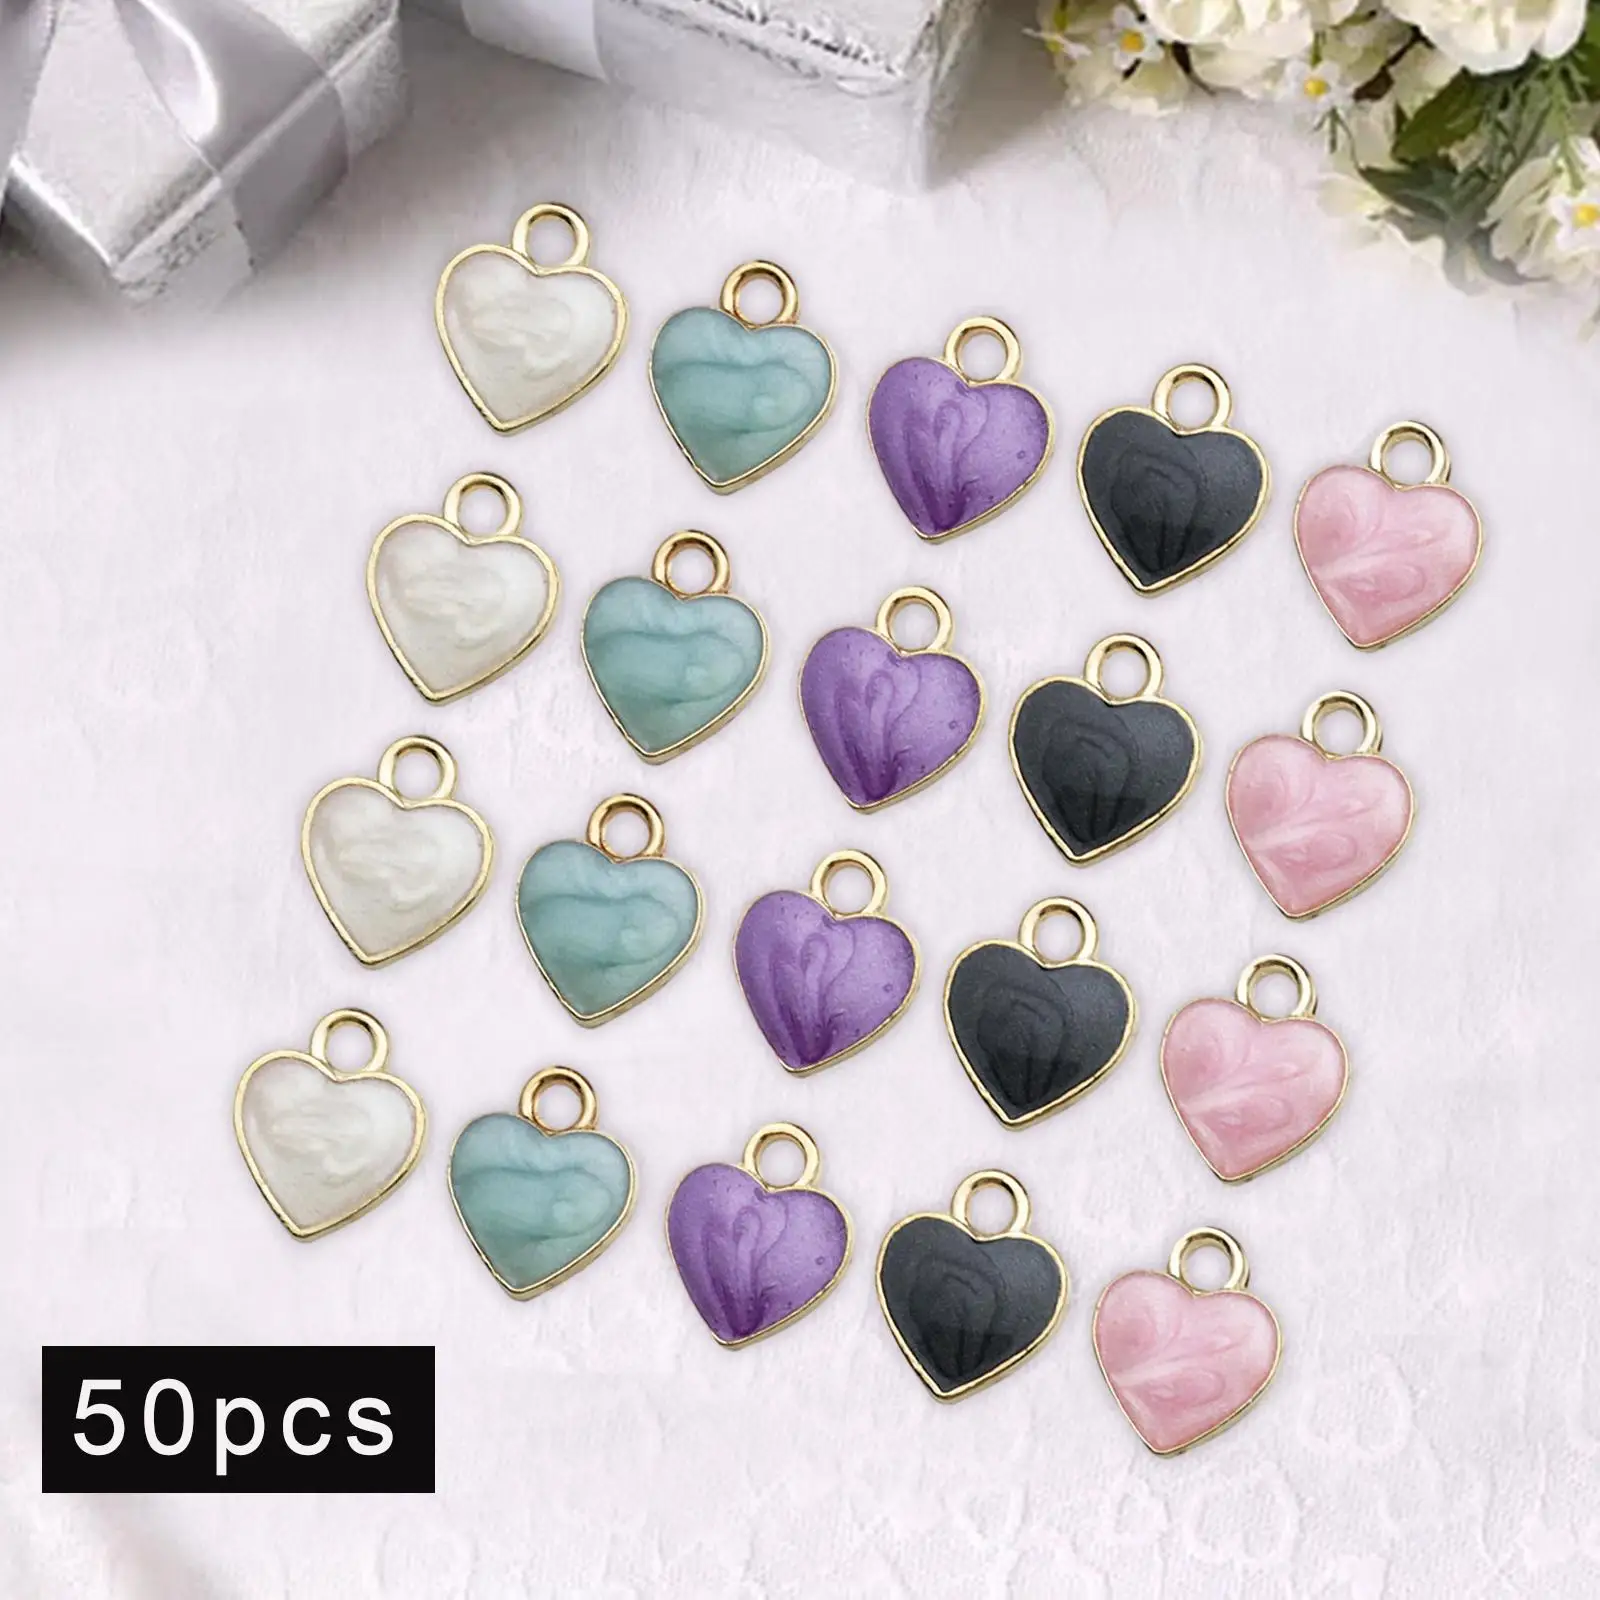 50 Pieces Love Heart Charms Smooth Surface Ornaments Alloy Valentine`s Gifts for Kids Wife Couples Girlfriend Family Members